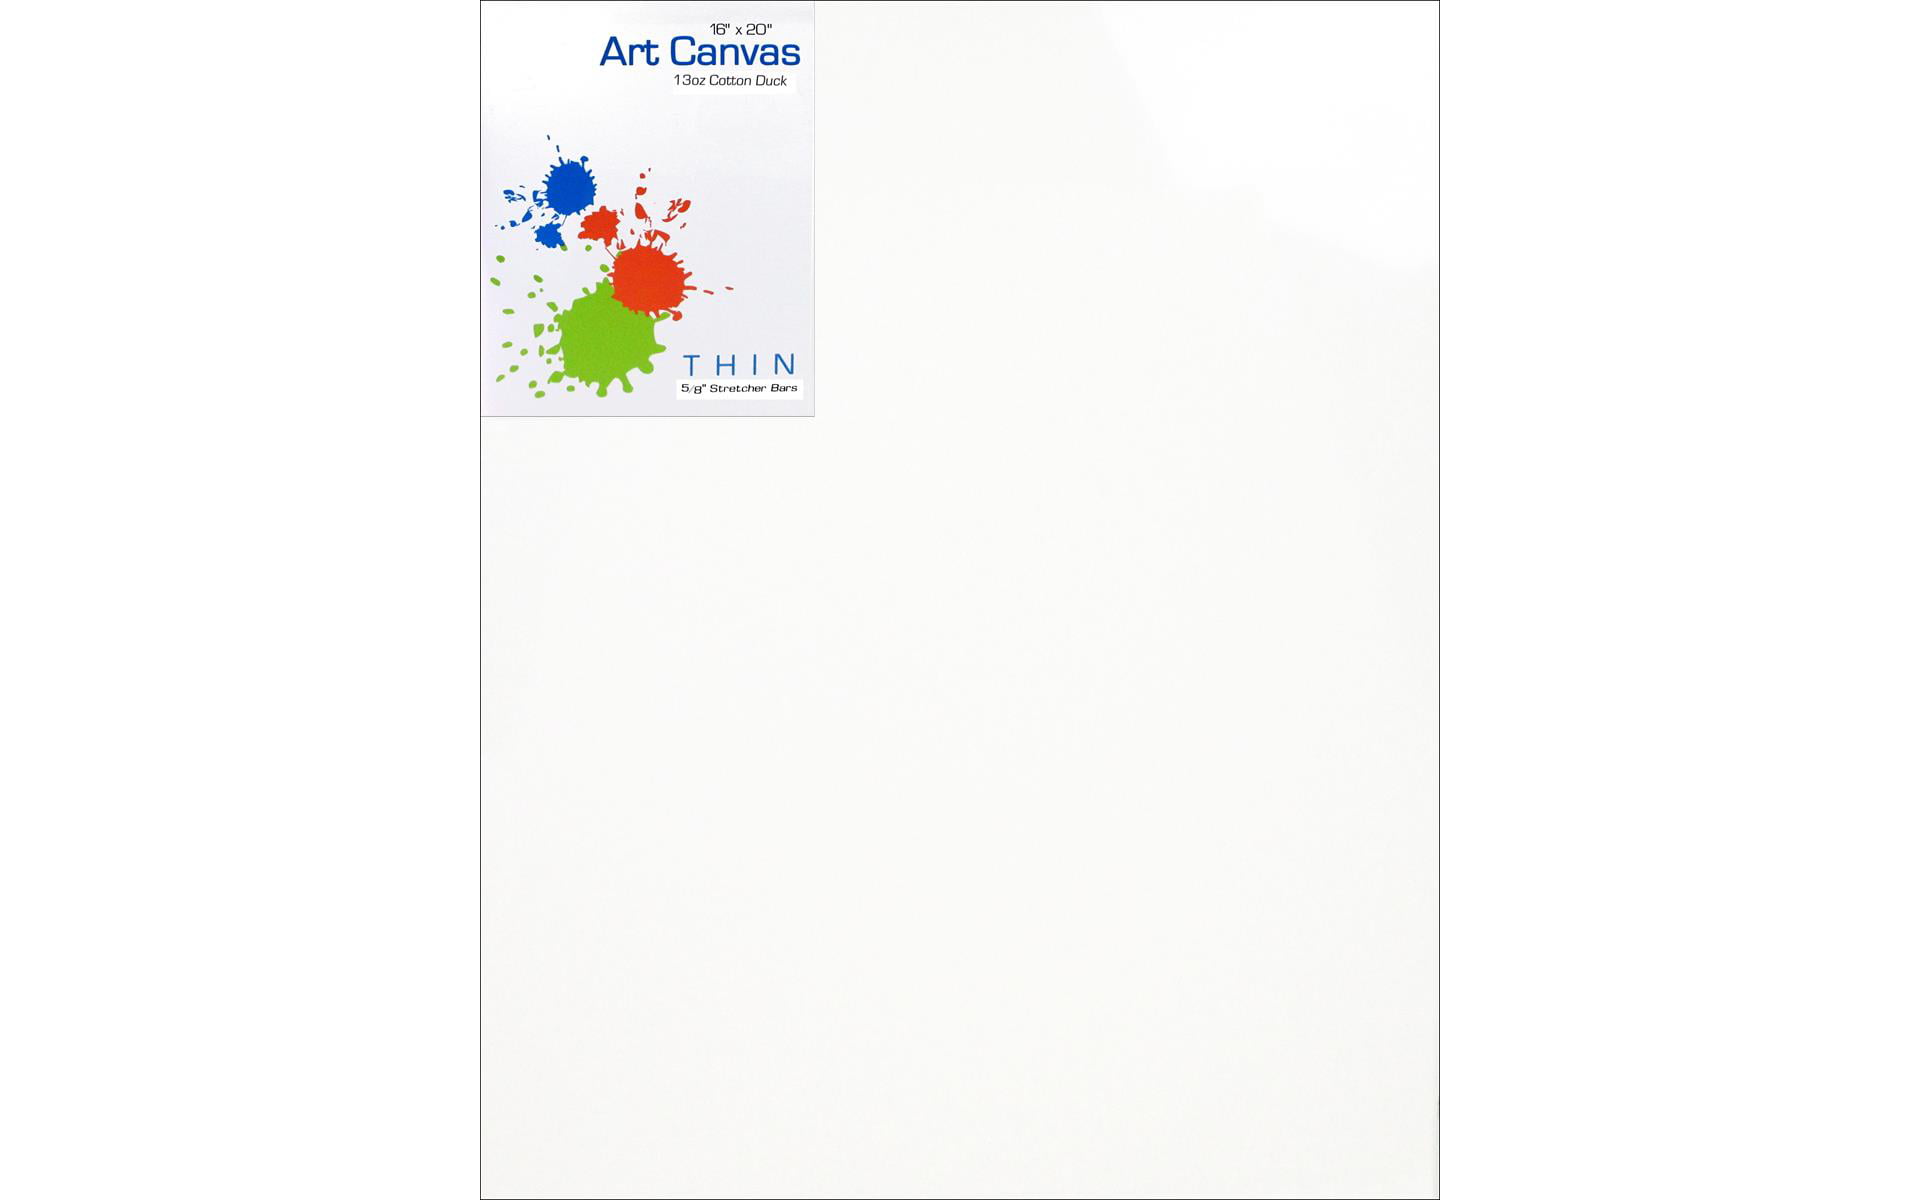  U.S. Art Supply 5 x 5 Mini Professional Primed Stretched  Canvas (1-Pack of 12-Mini Canvases) - Ideal for Painting & Crafts